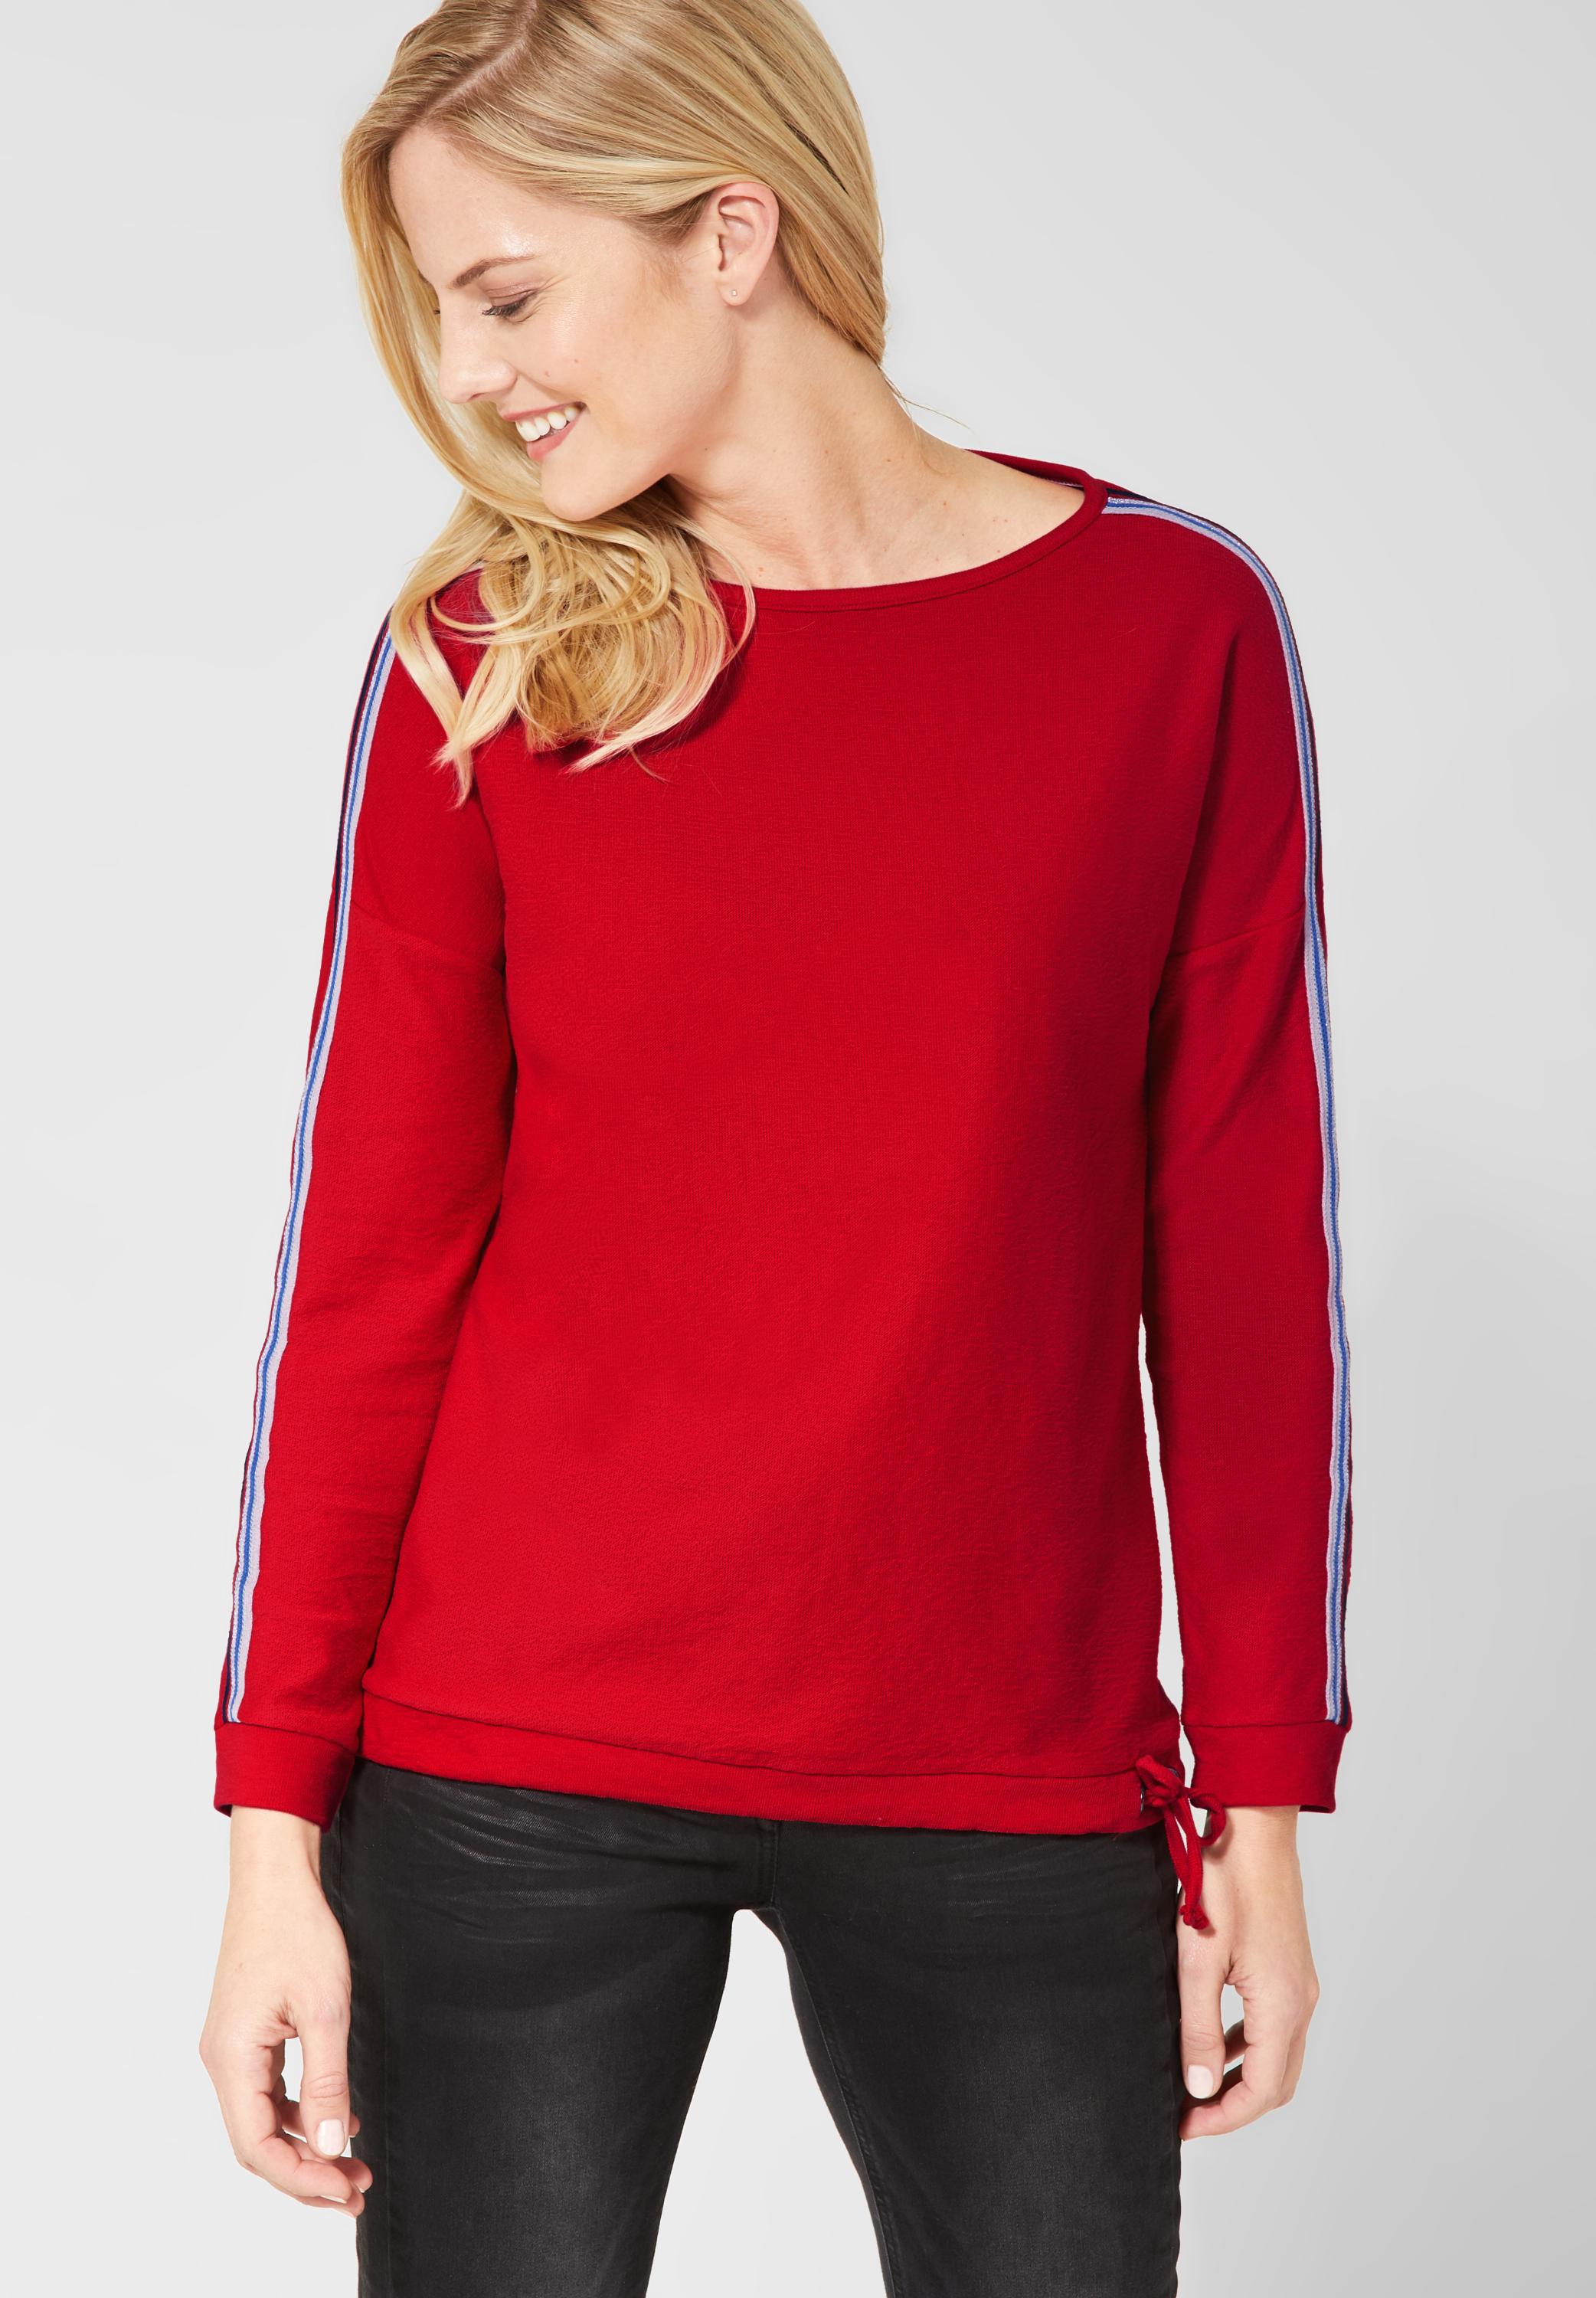 CECIL Langarmshirt in Tomato Red B314407-12014 - CONCEPT Mode